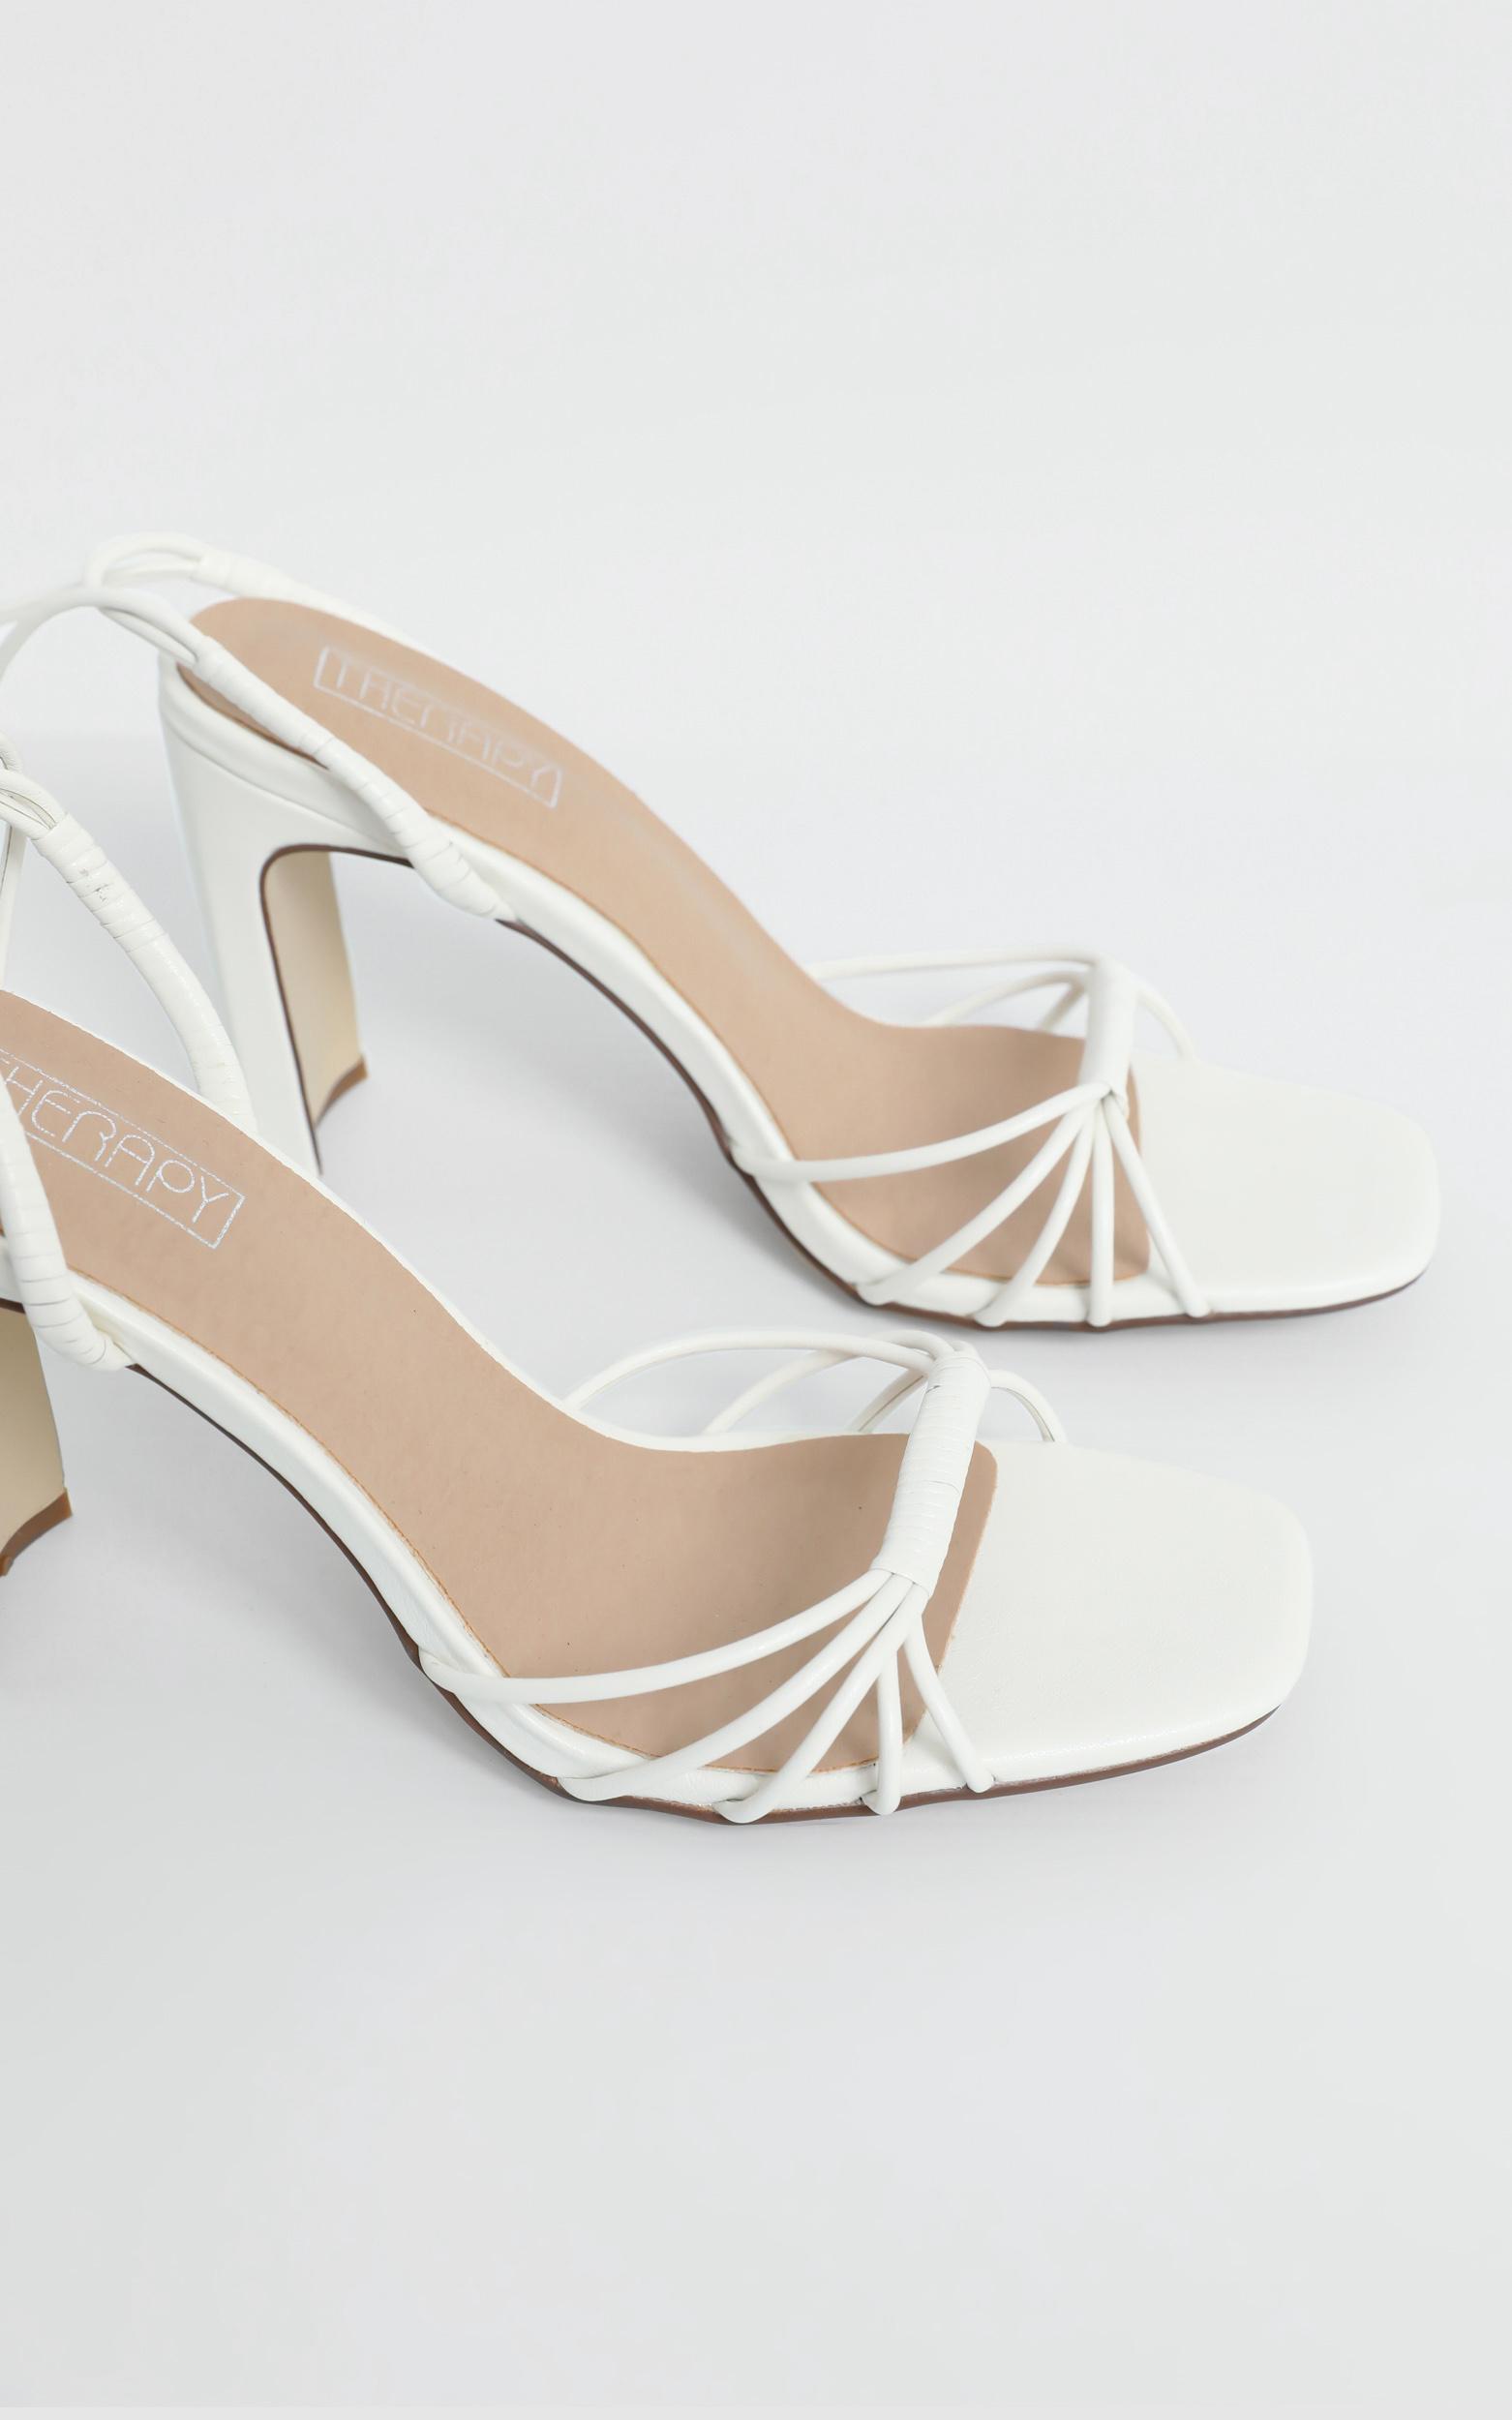 Therapy - Bexley Heels in White - 05, WHT3, hi-res image number null